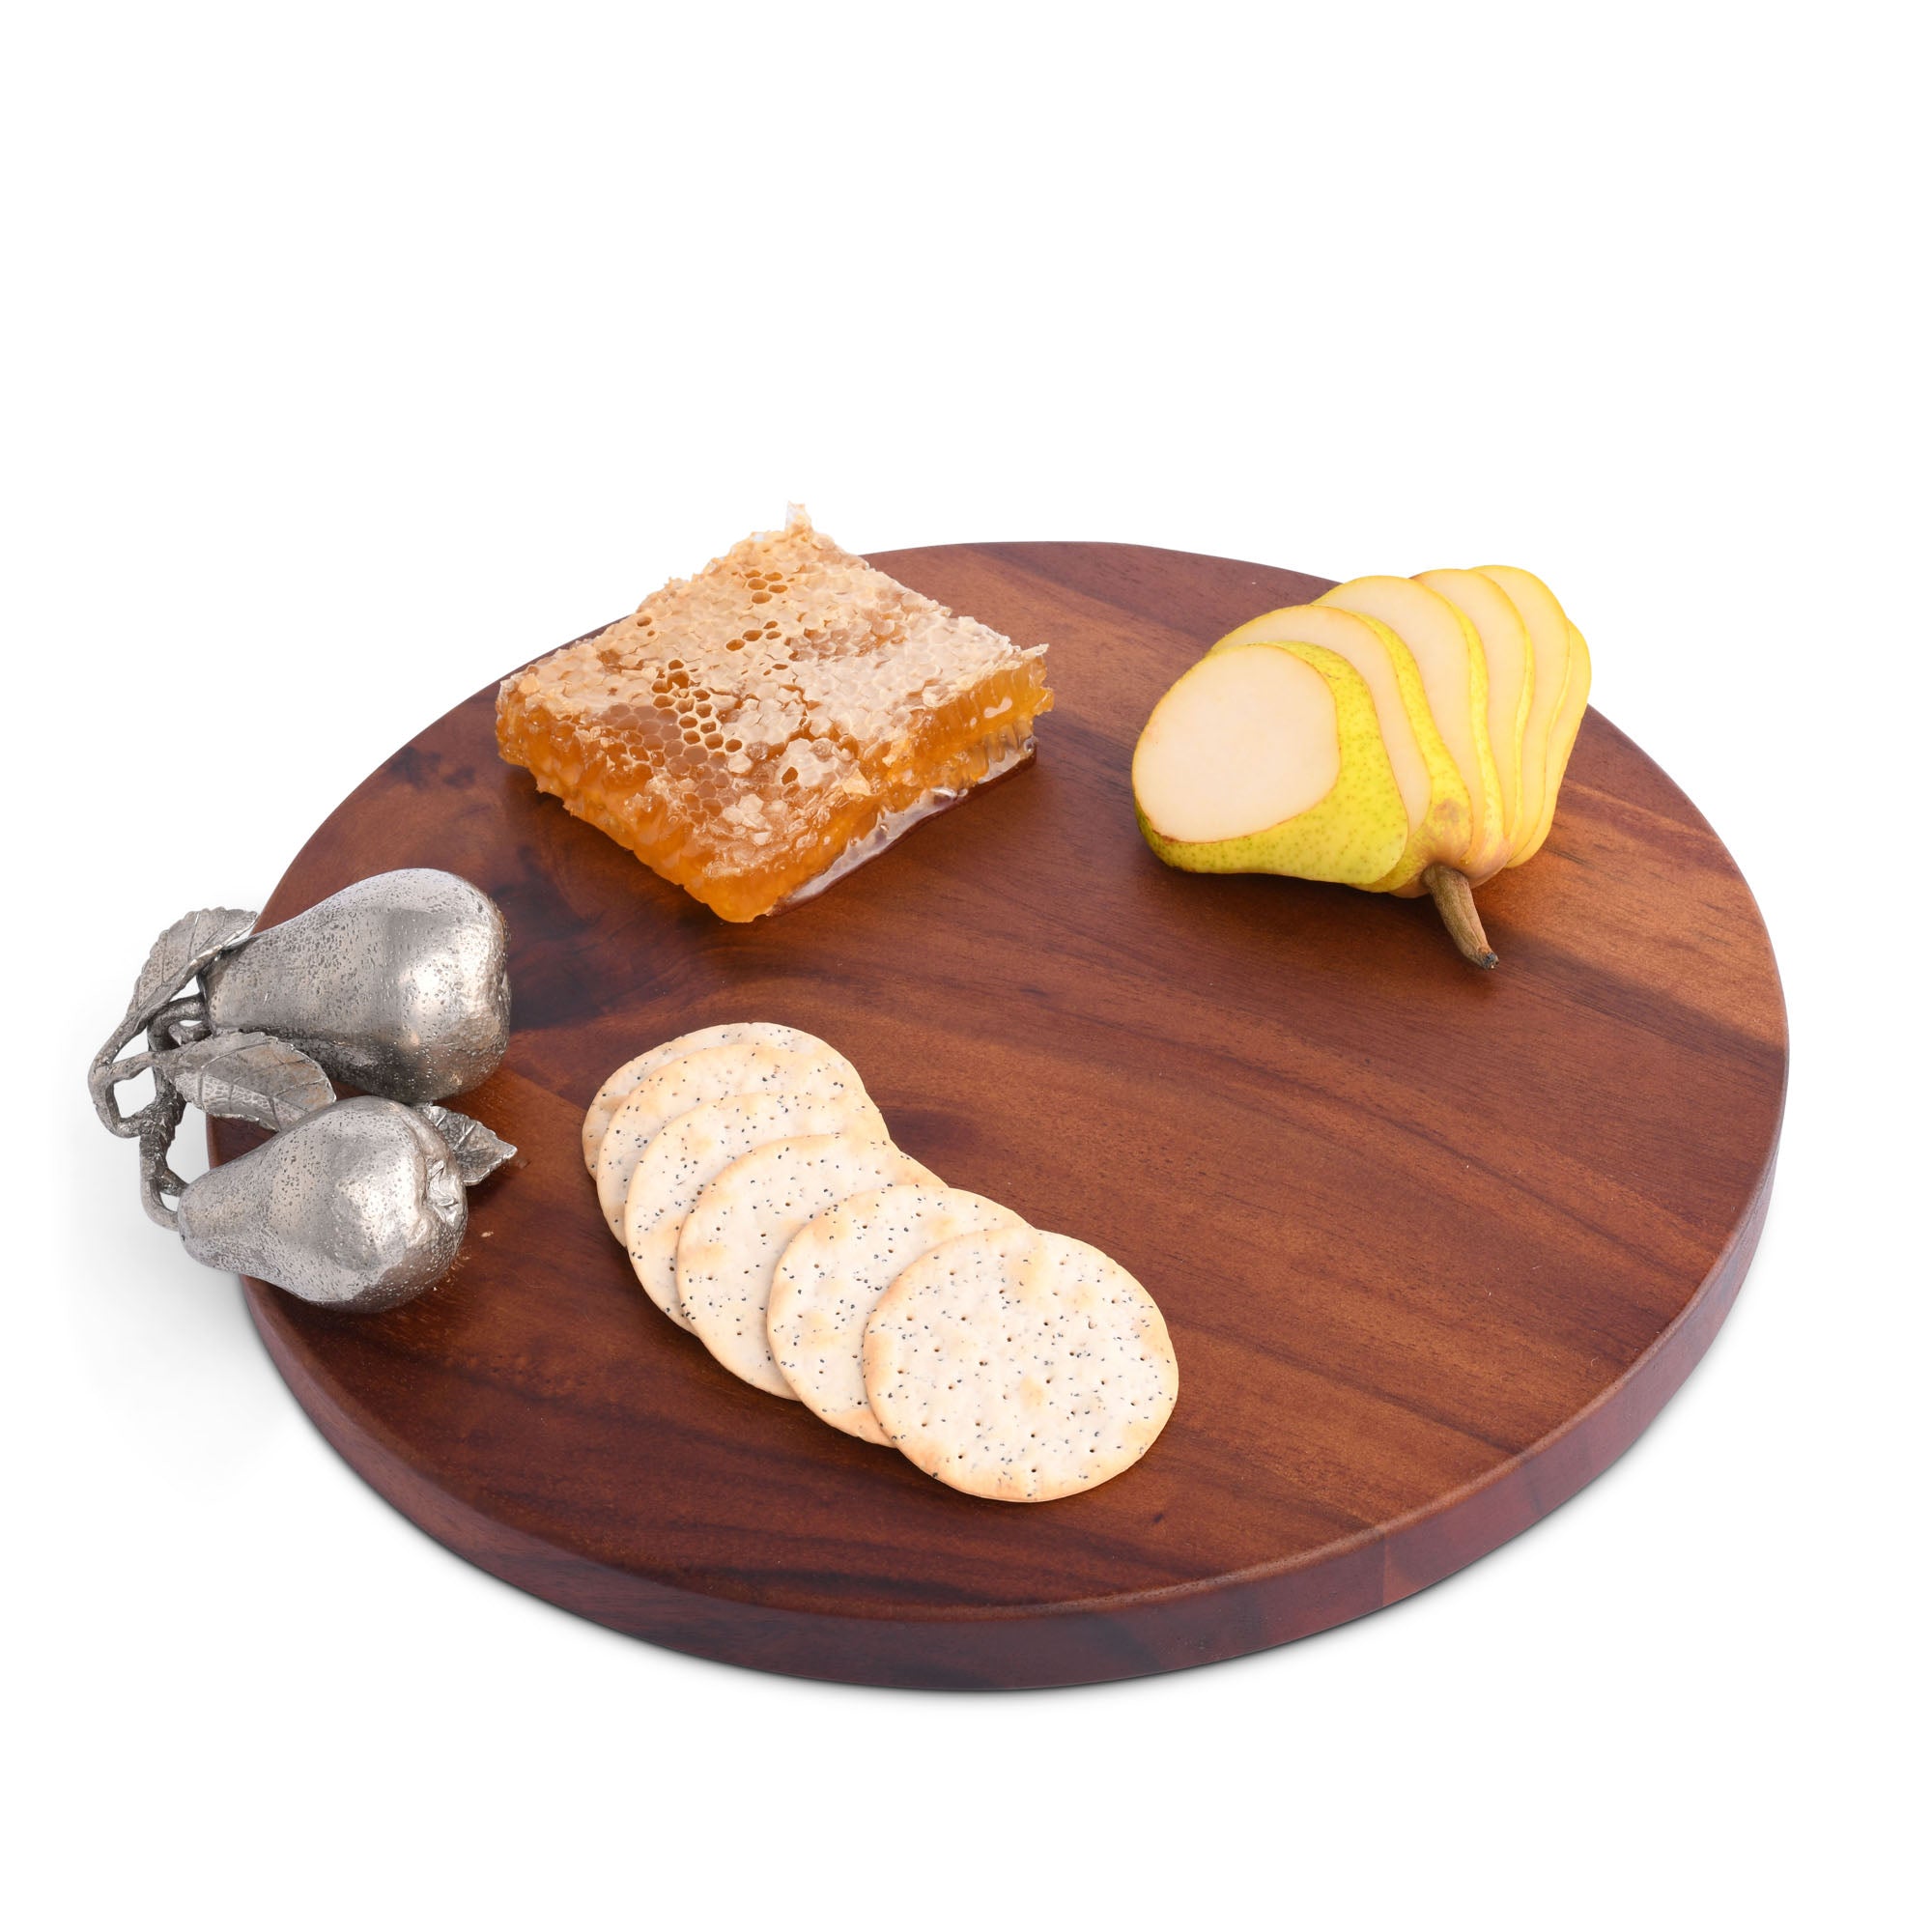 Vagabond House Pear Cheese Tray Product Image